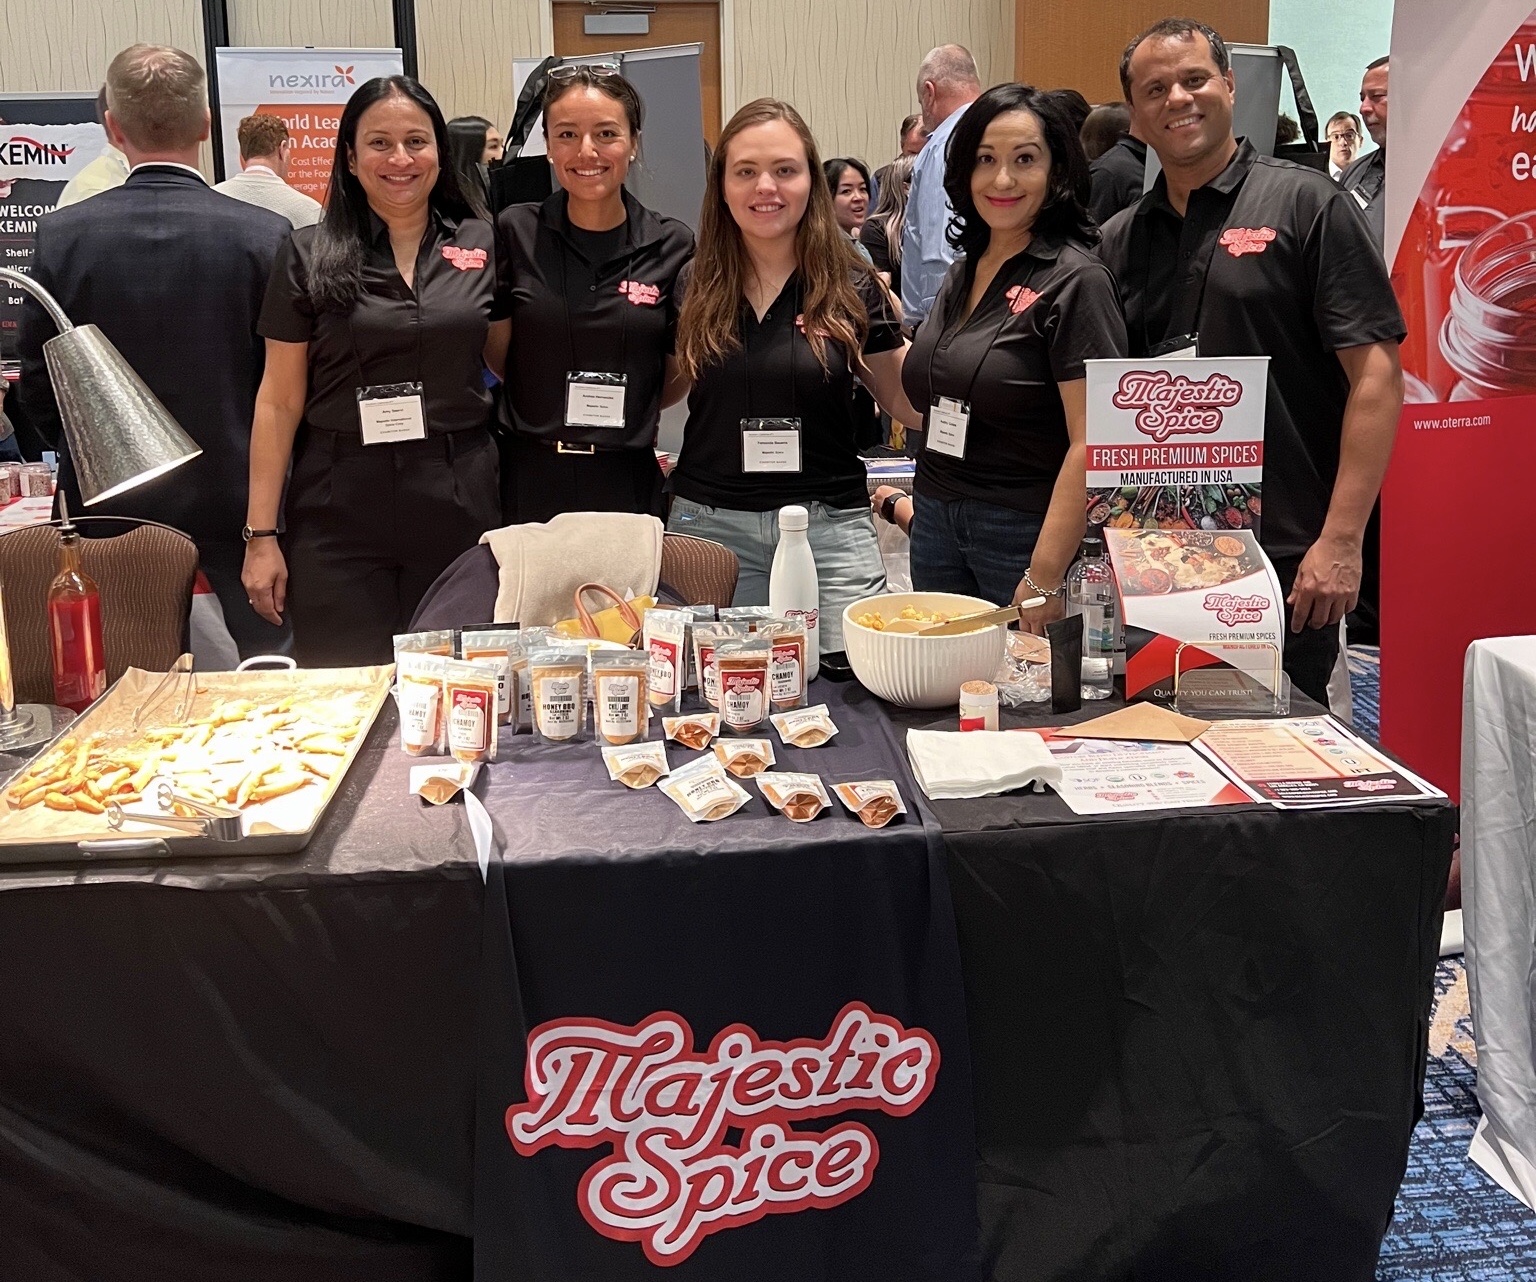 Picture of Majestic Spice's team. 4 Ladies and one Man. All wearing black, behind a black Table with the Majestic Spice logo. On the table, there are Majestic Spice samples, our flyers as well as some fries and a white bowl with chili gummies.